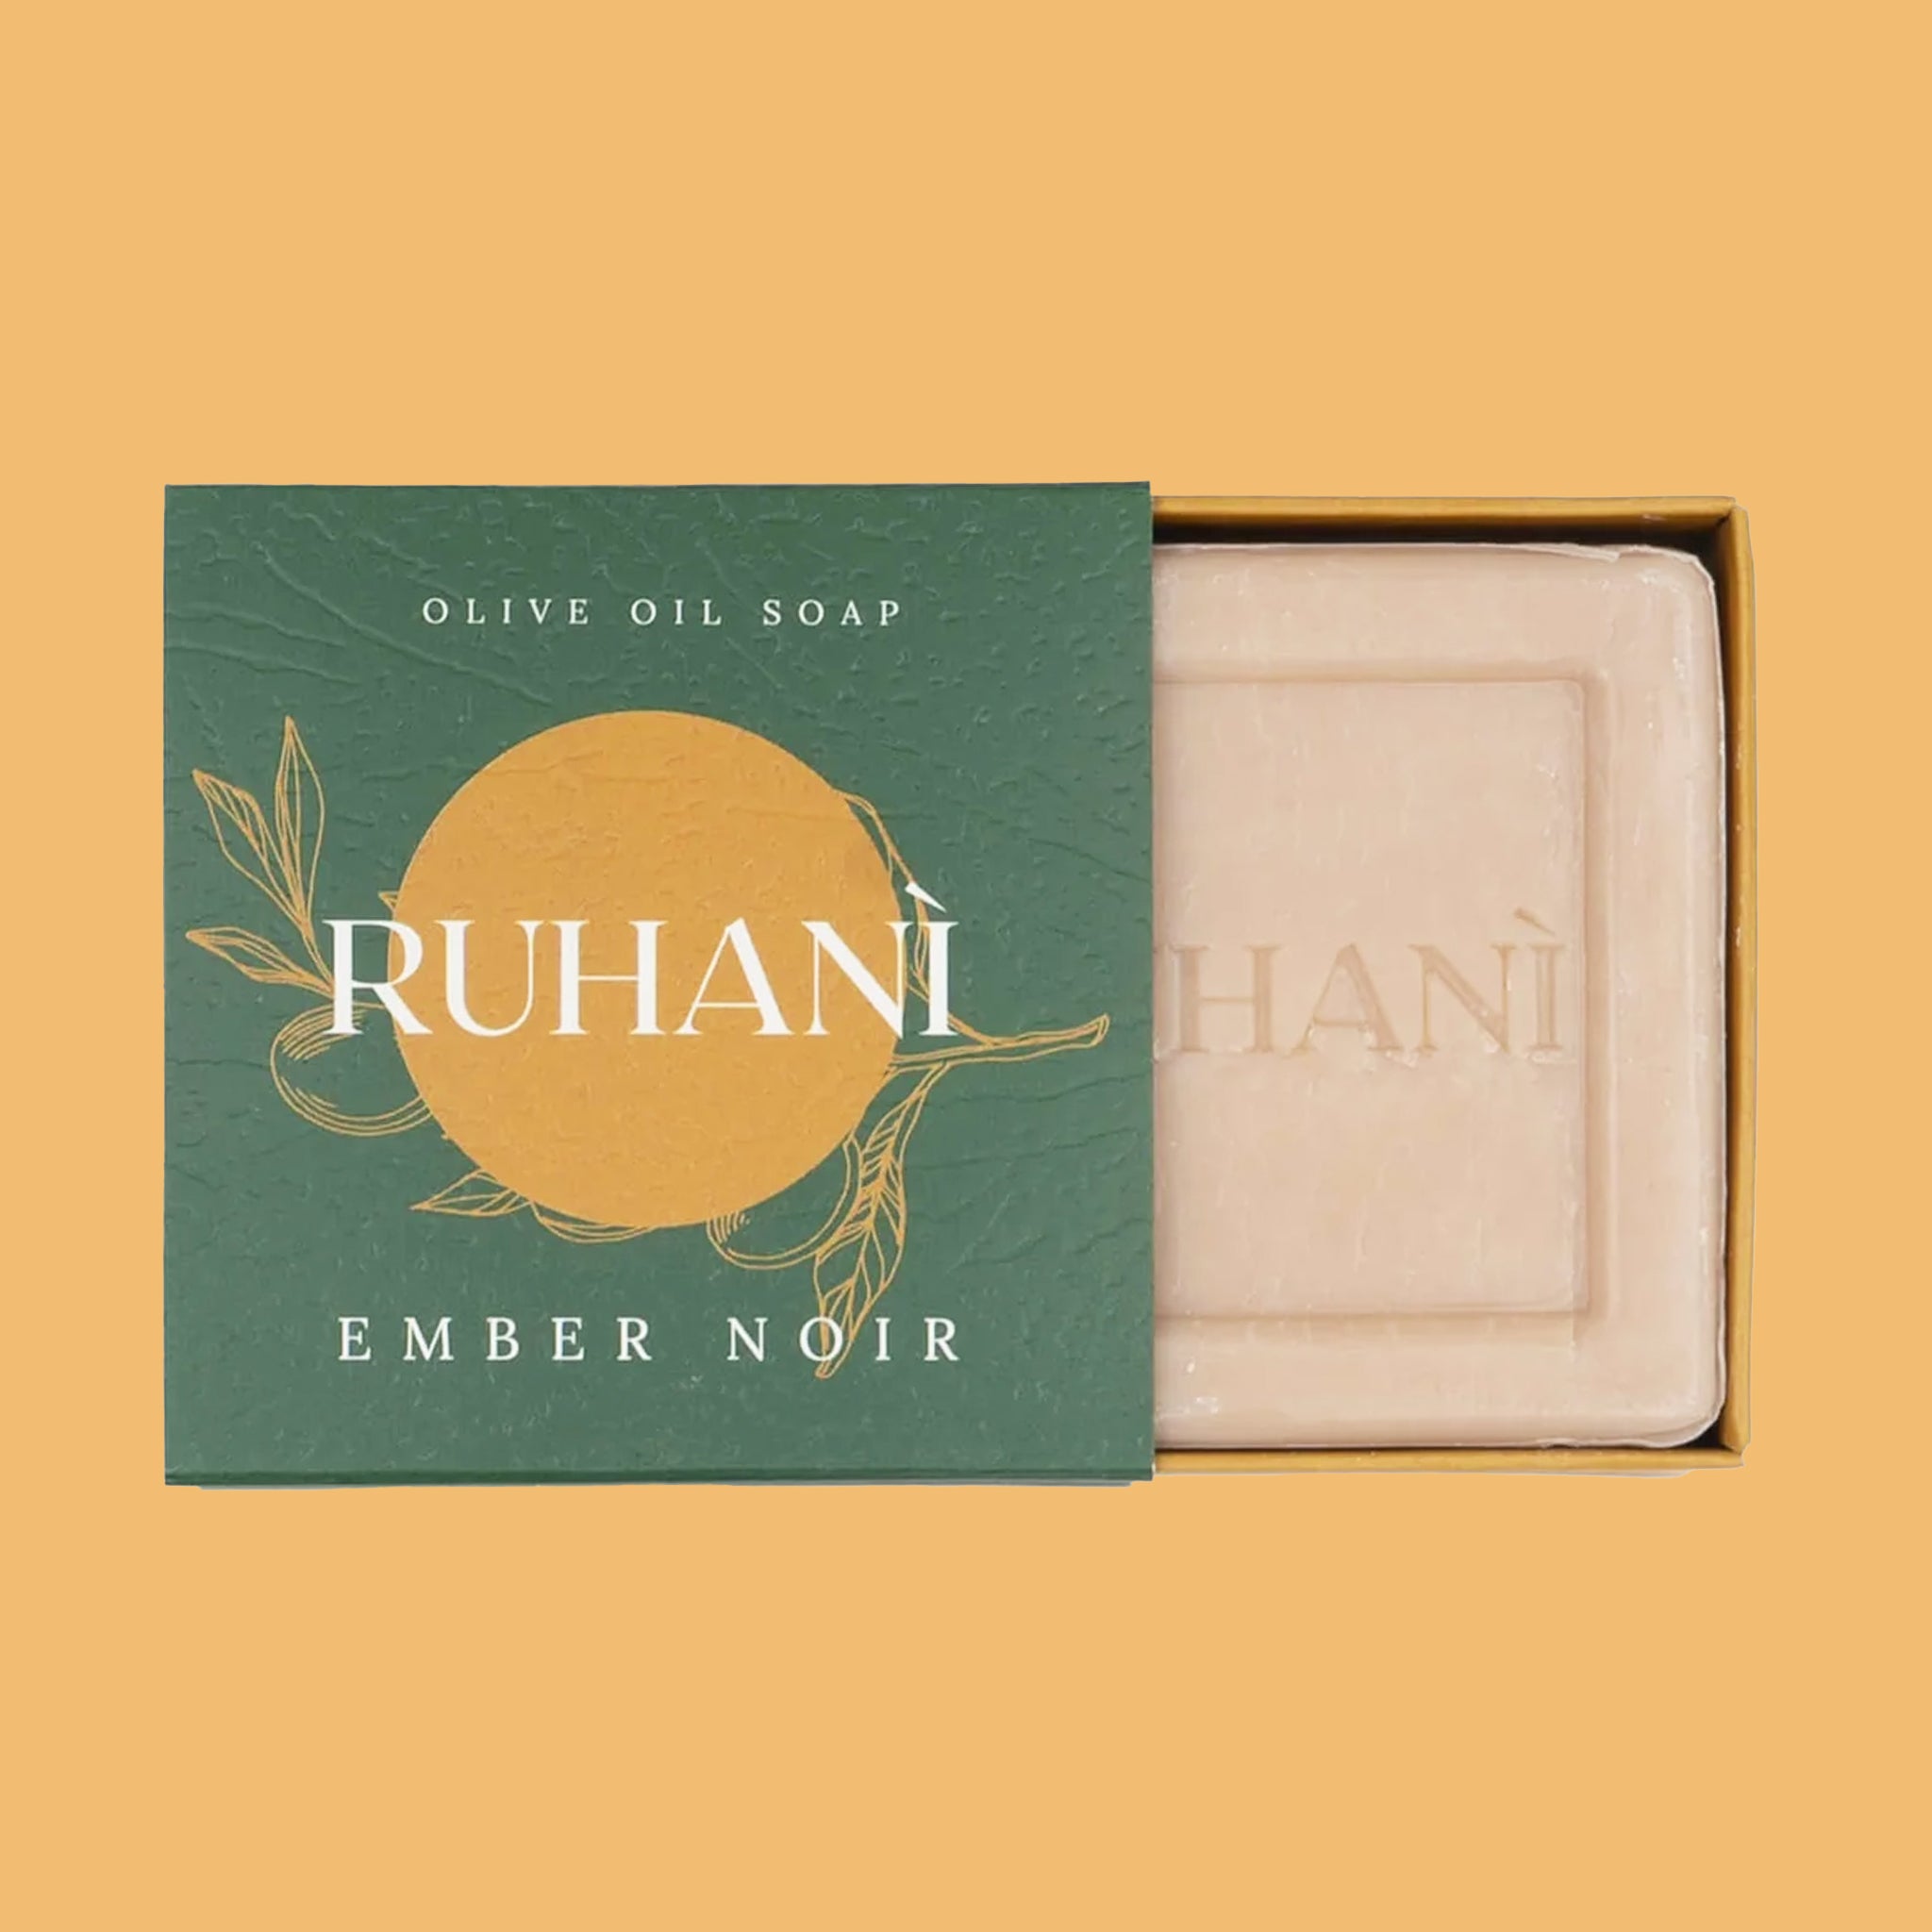 A bar of soap in a green and yellow packaging that reads, "Ruhani Ember Noir". 